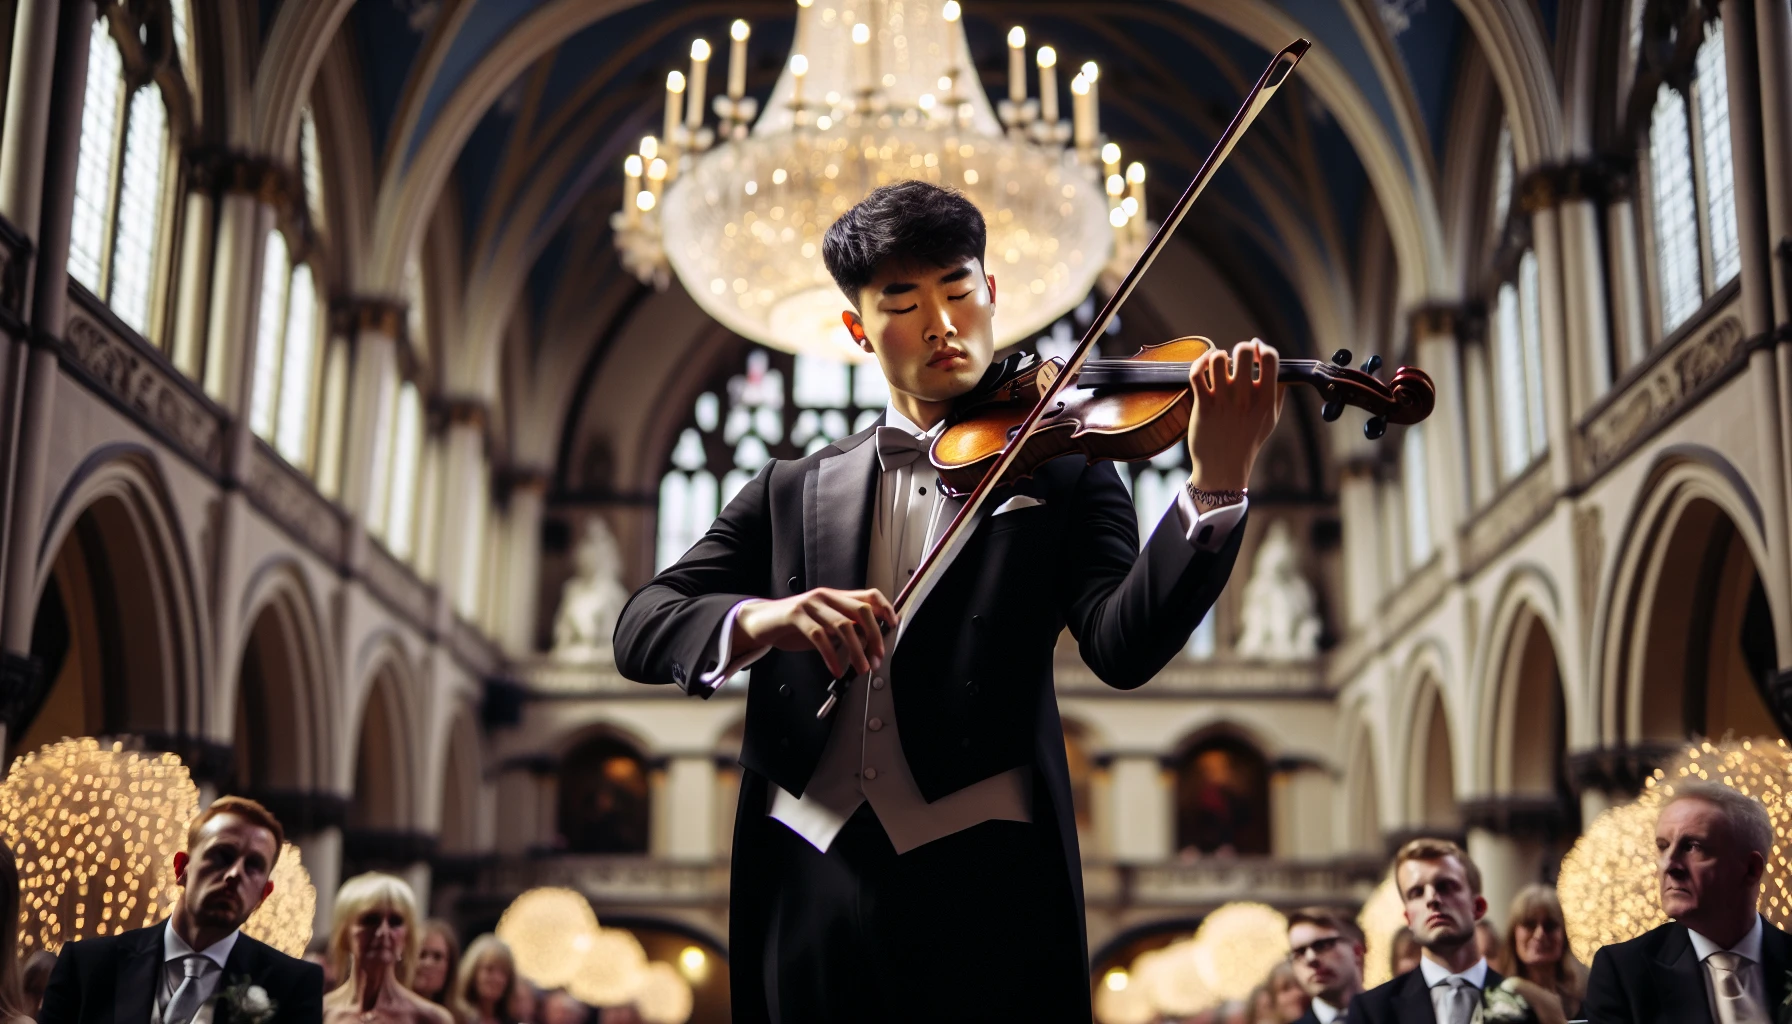 A talented violinist performing at a wedding ceremony in Manchester.